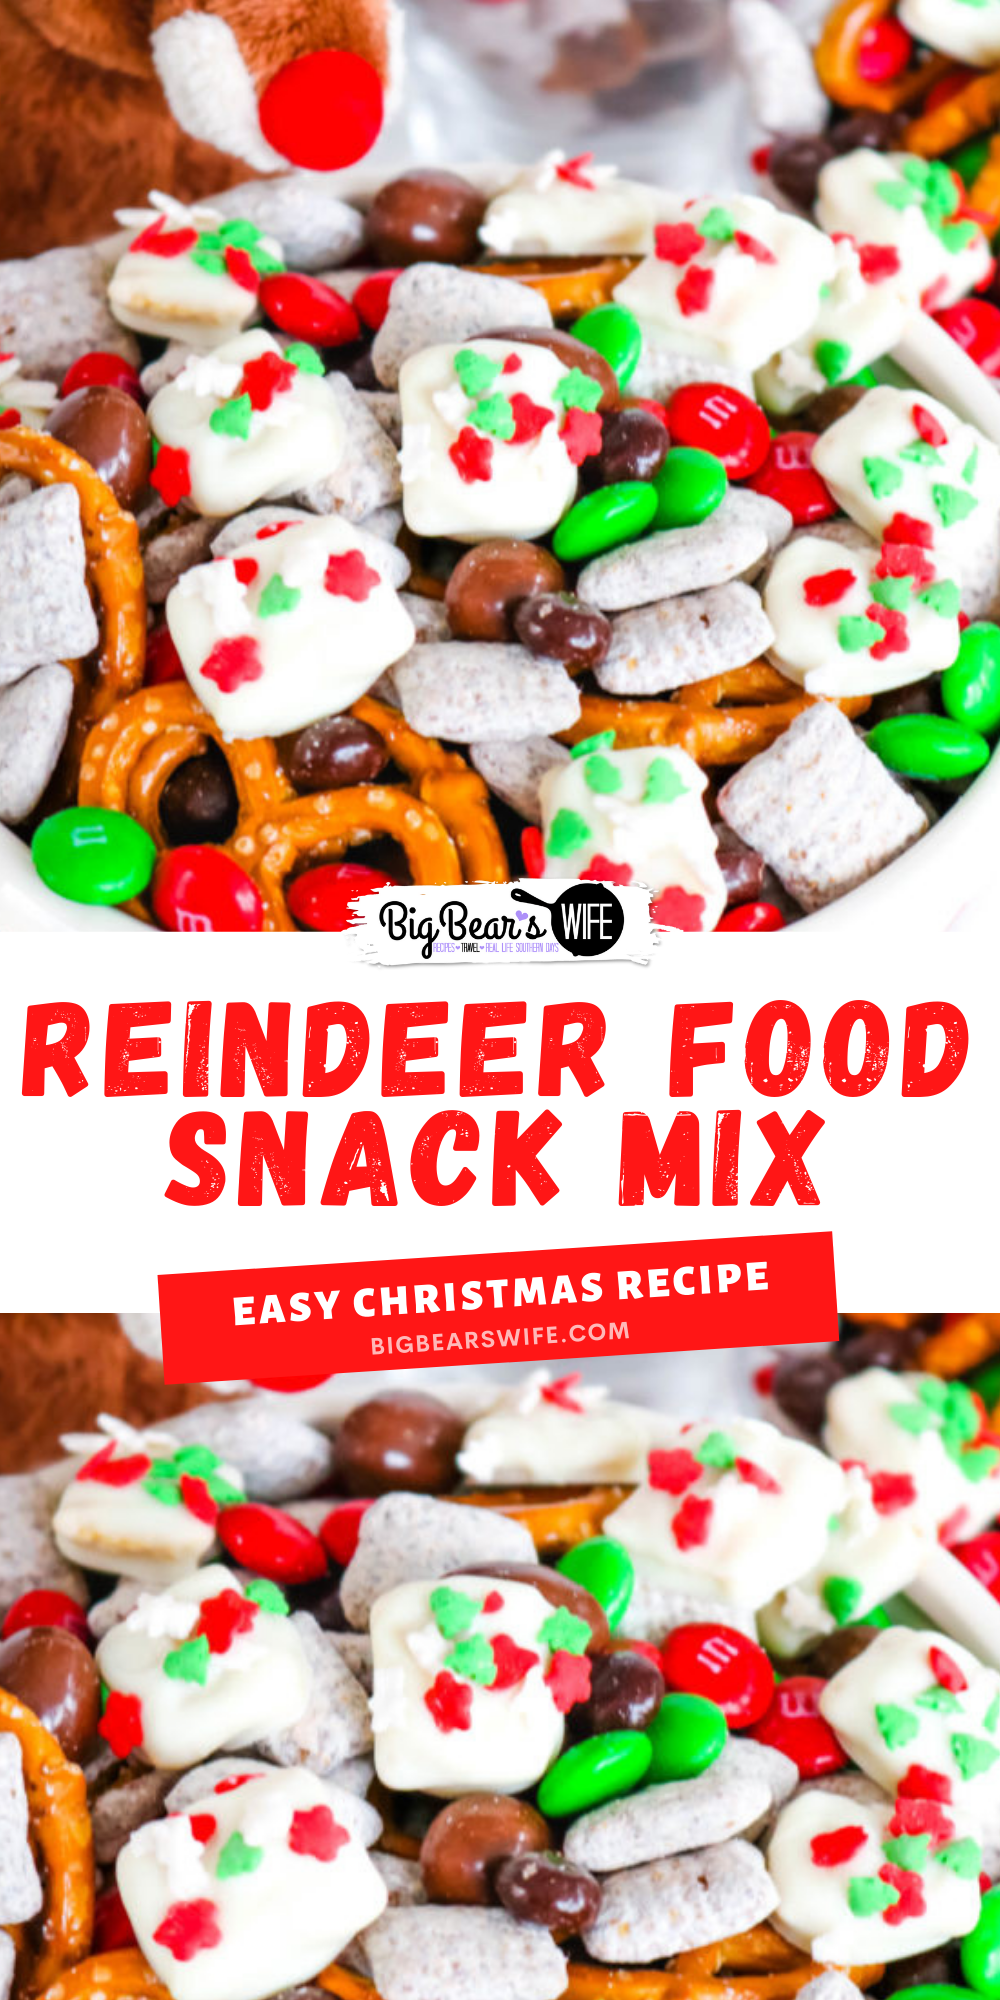 Reindeer Food Snack Mix is a festive trail mix with sweet and salty treats mixed together with homemade Reindeer Food bites!  via @bigbearswife